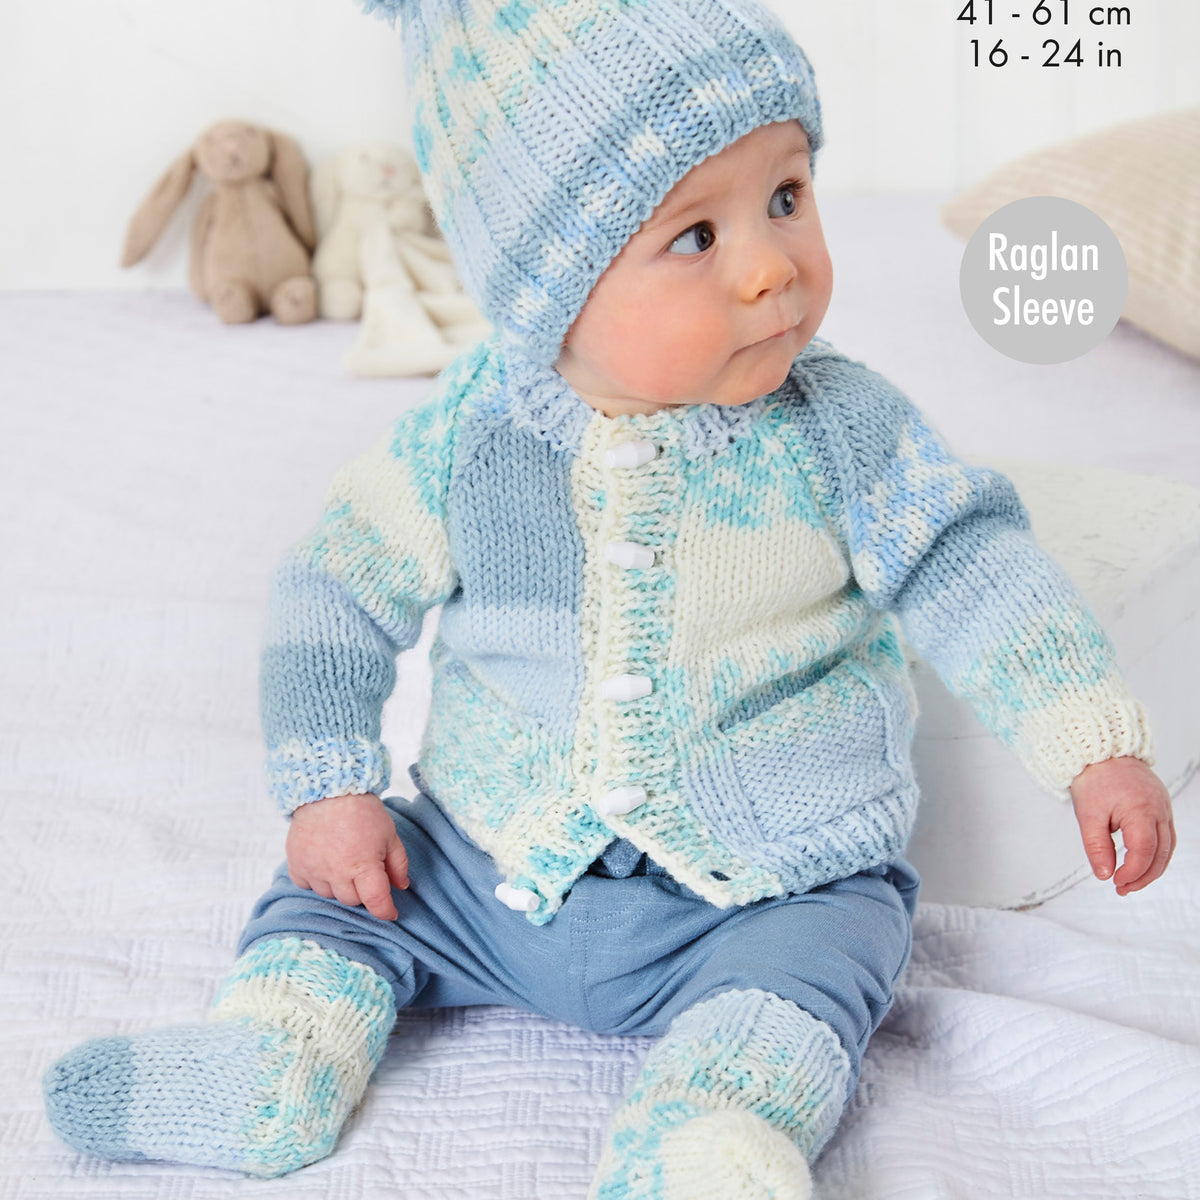 King Cole Knitting Patterns | Buy 3 and Save 10% on Leaflet Patterns on ...